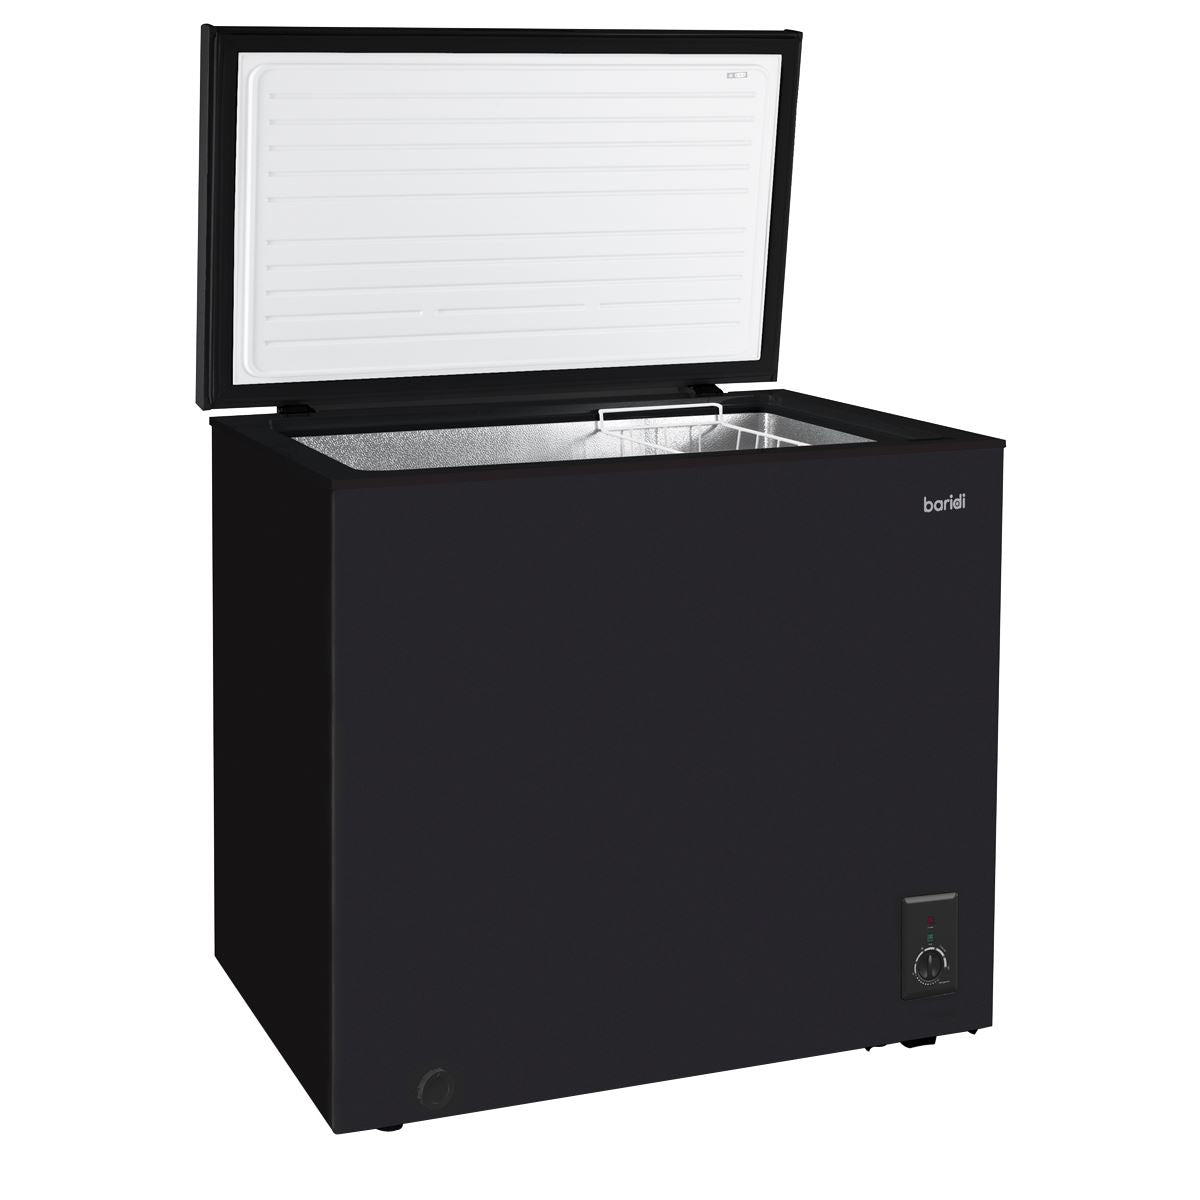 Baridi Freestanding Chest Freezer, 142L Capacity, Garages and Outbuilding Safe